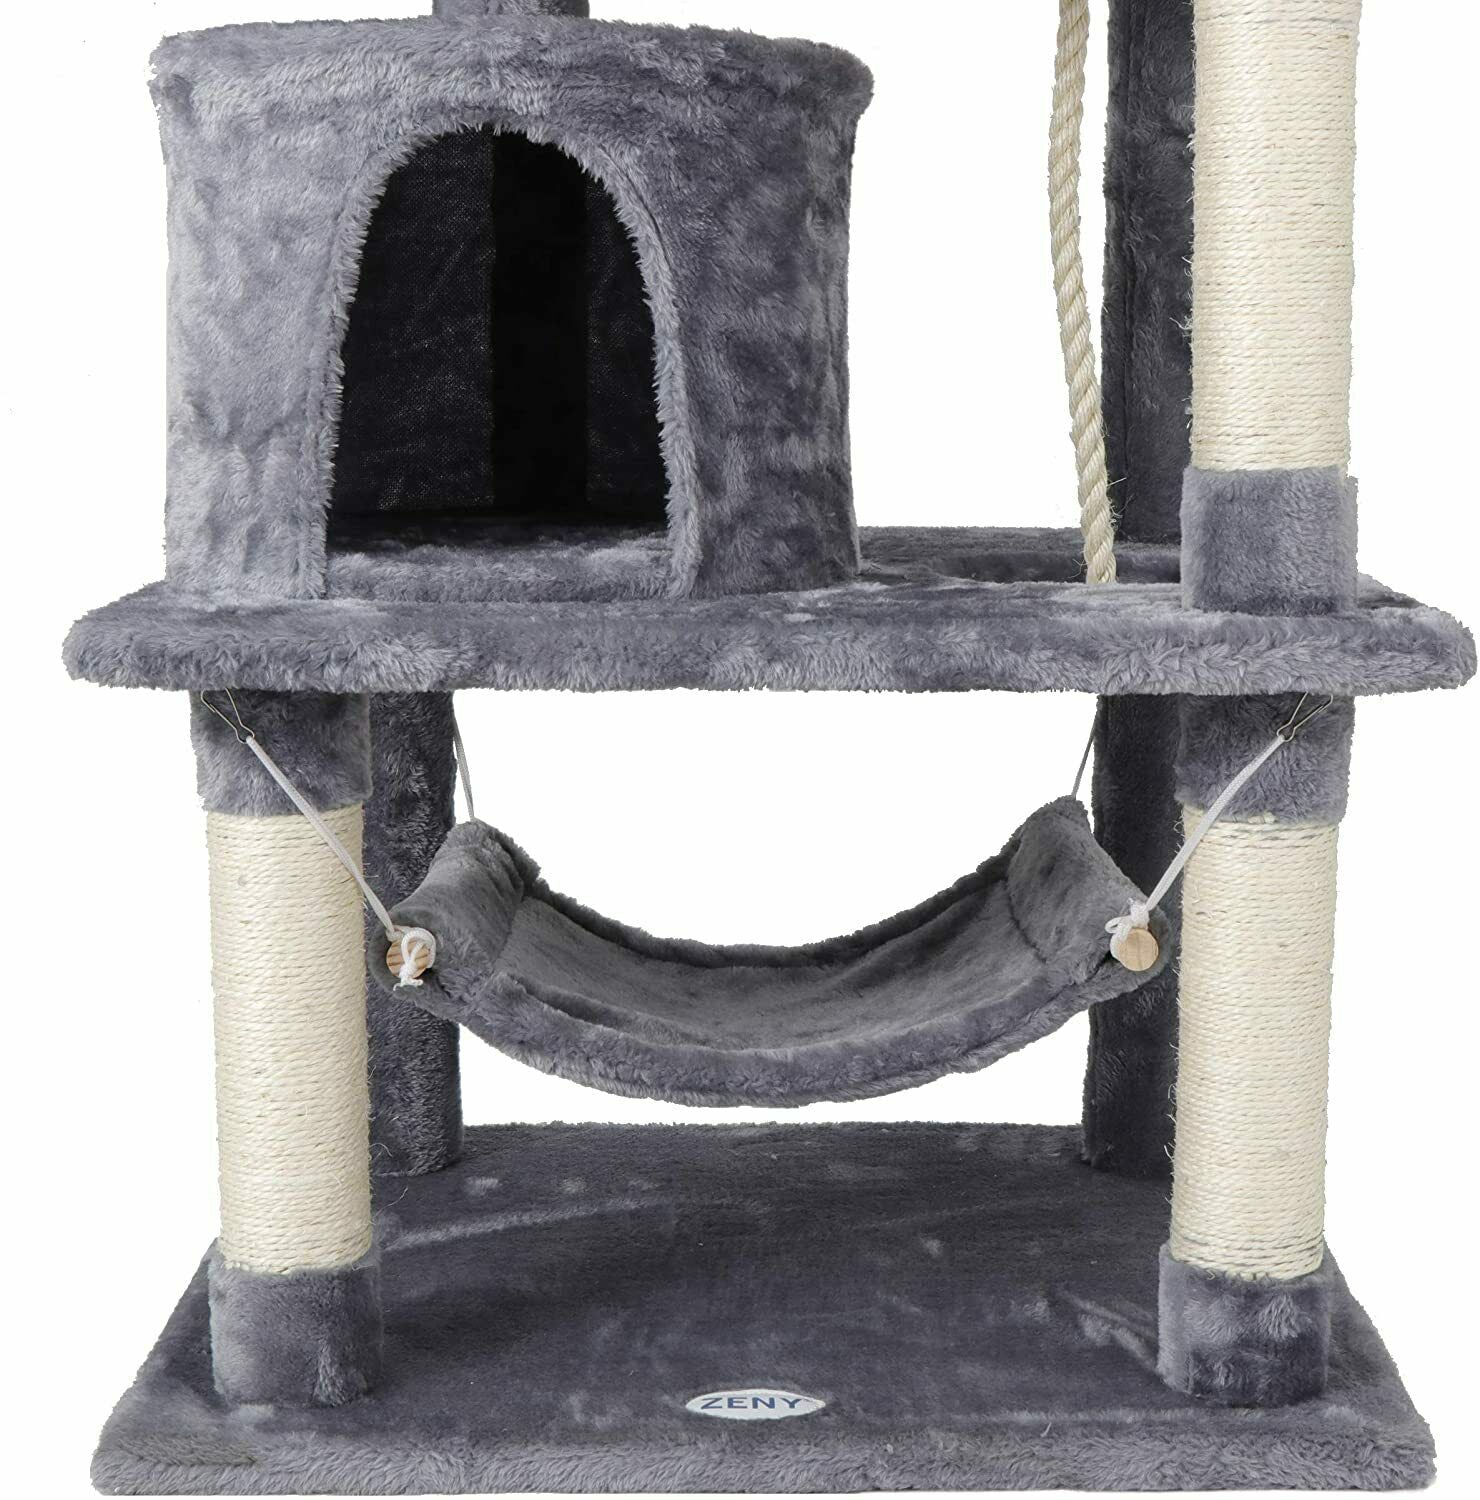 57" Cat Tree Condo Pet Furniture Activity Tower Play House with Perches Hammock